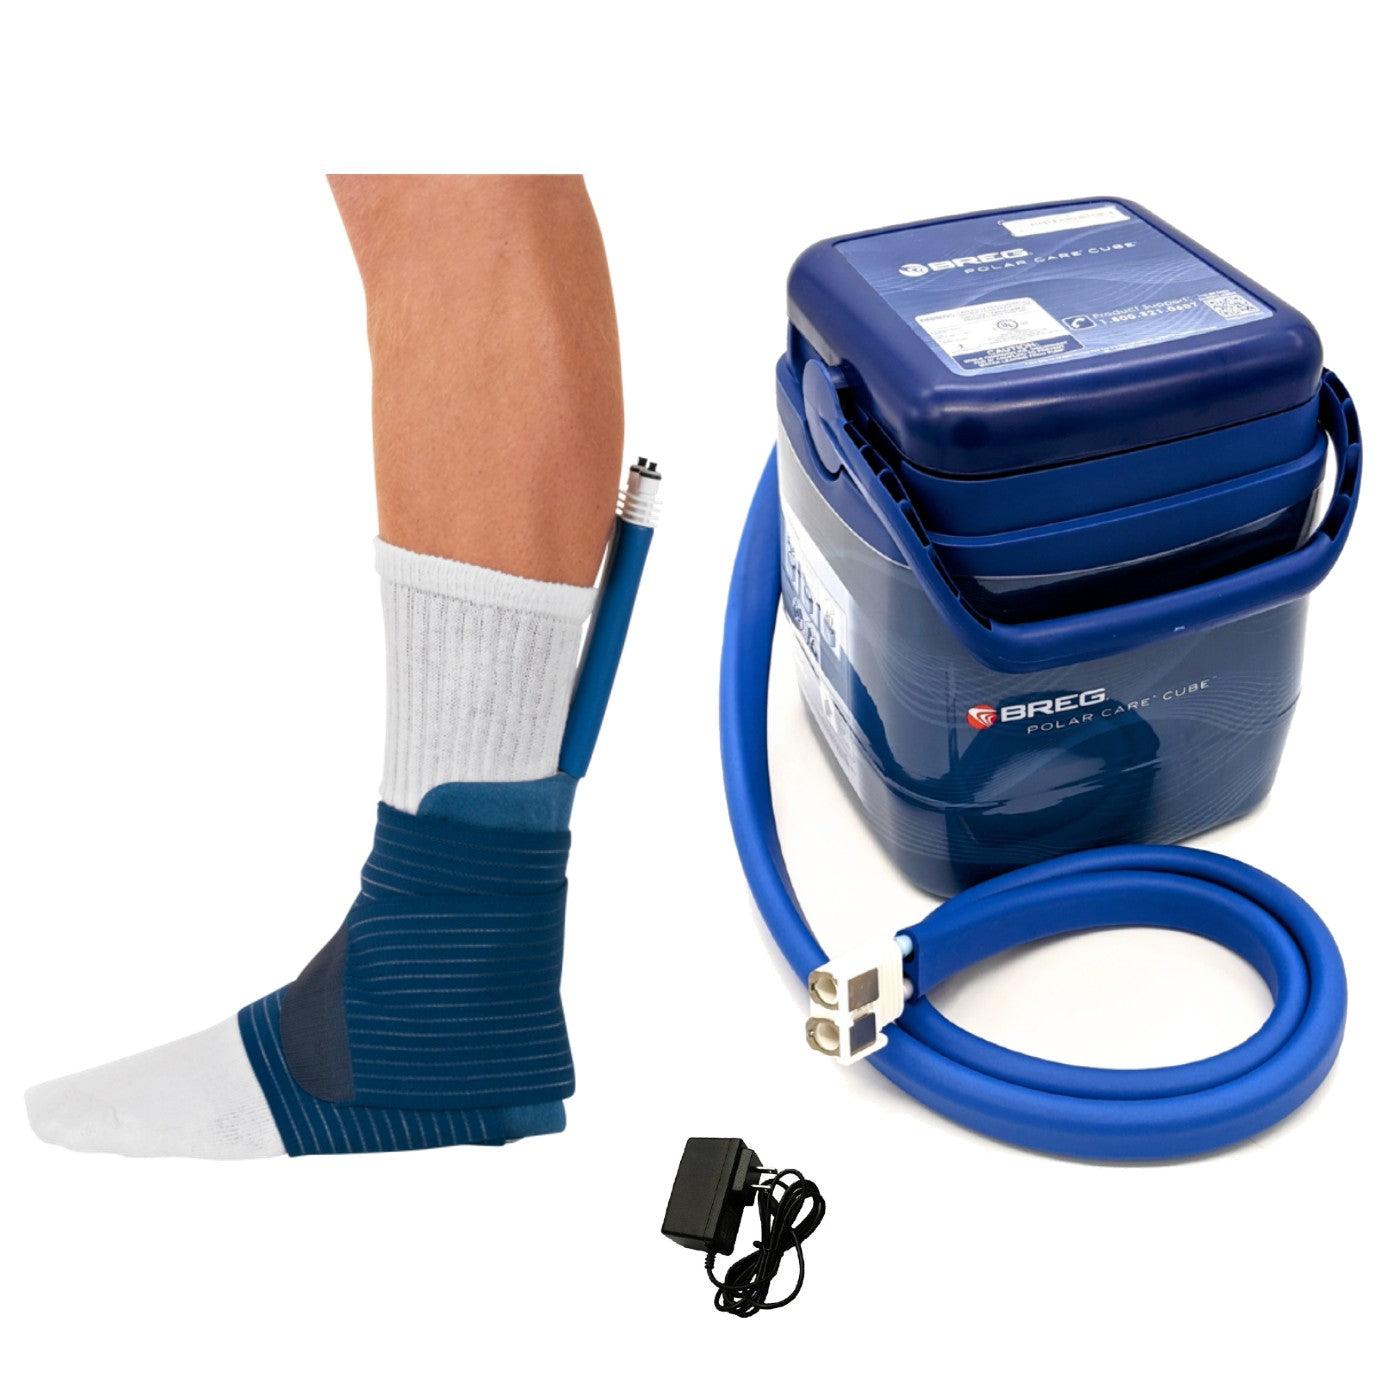 Breg® Polar Care Cube System w/ Wrap-On Pads - 10701-04730 Breg® Polar Care Cube System w/ Wrap-On Pads - undefined by Supply Physical Therapy Breg, Cold Therapy Units, Combos, Cube